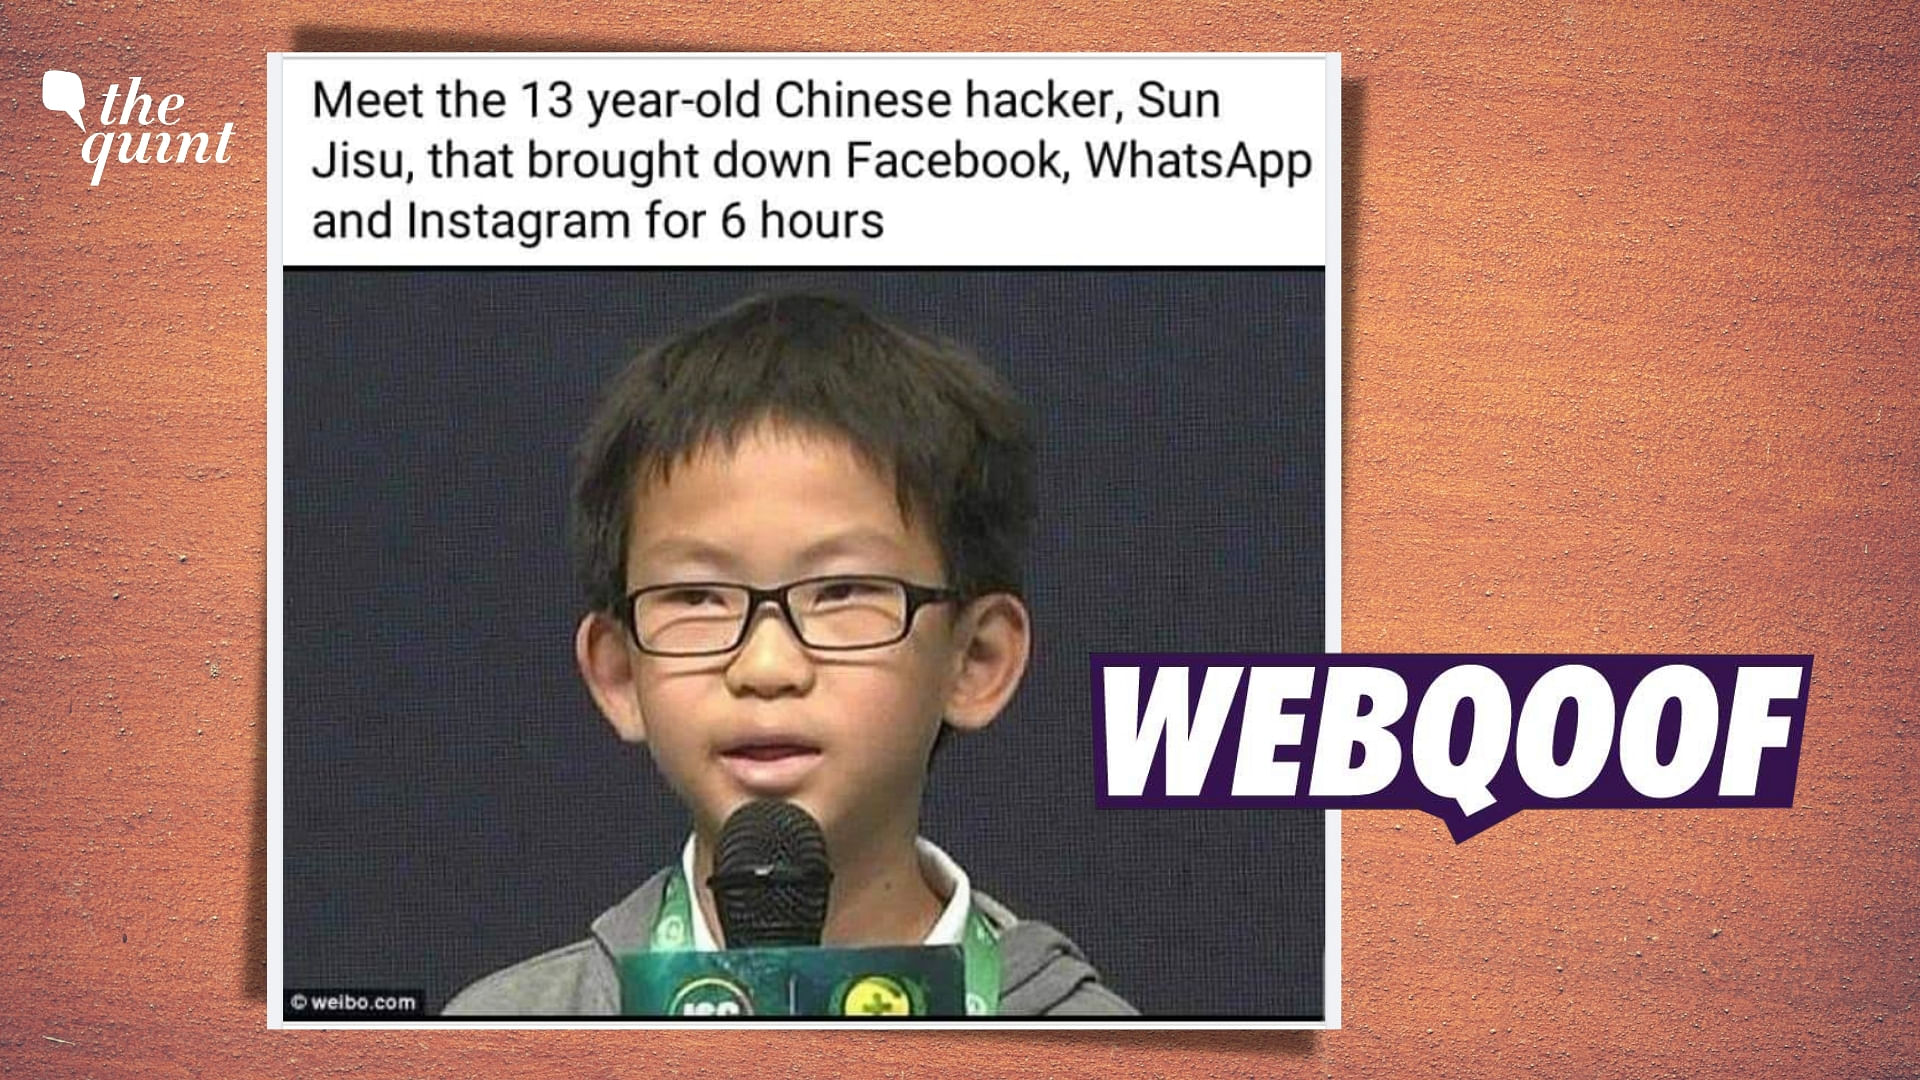 <div class="paragraphs"><p>The claim states that he is a Chinese hacker, Sun Jisu, who is responsible for the Facebook outage.&nbsp;</p></div>